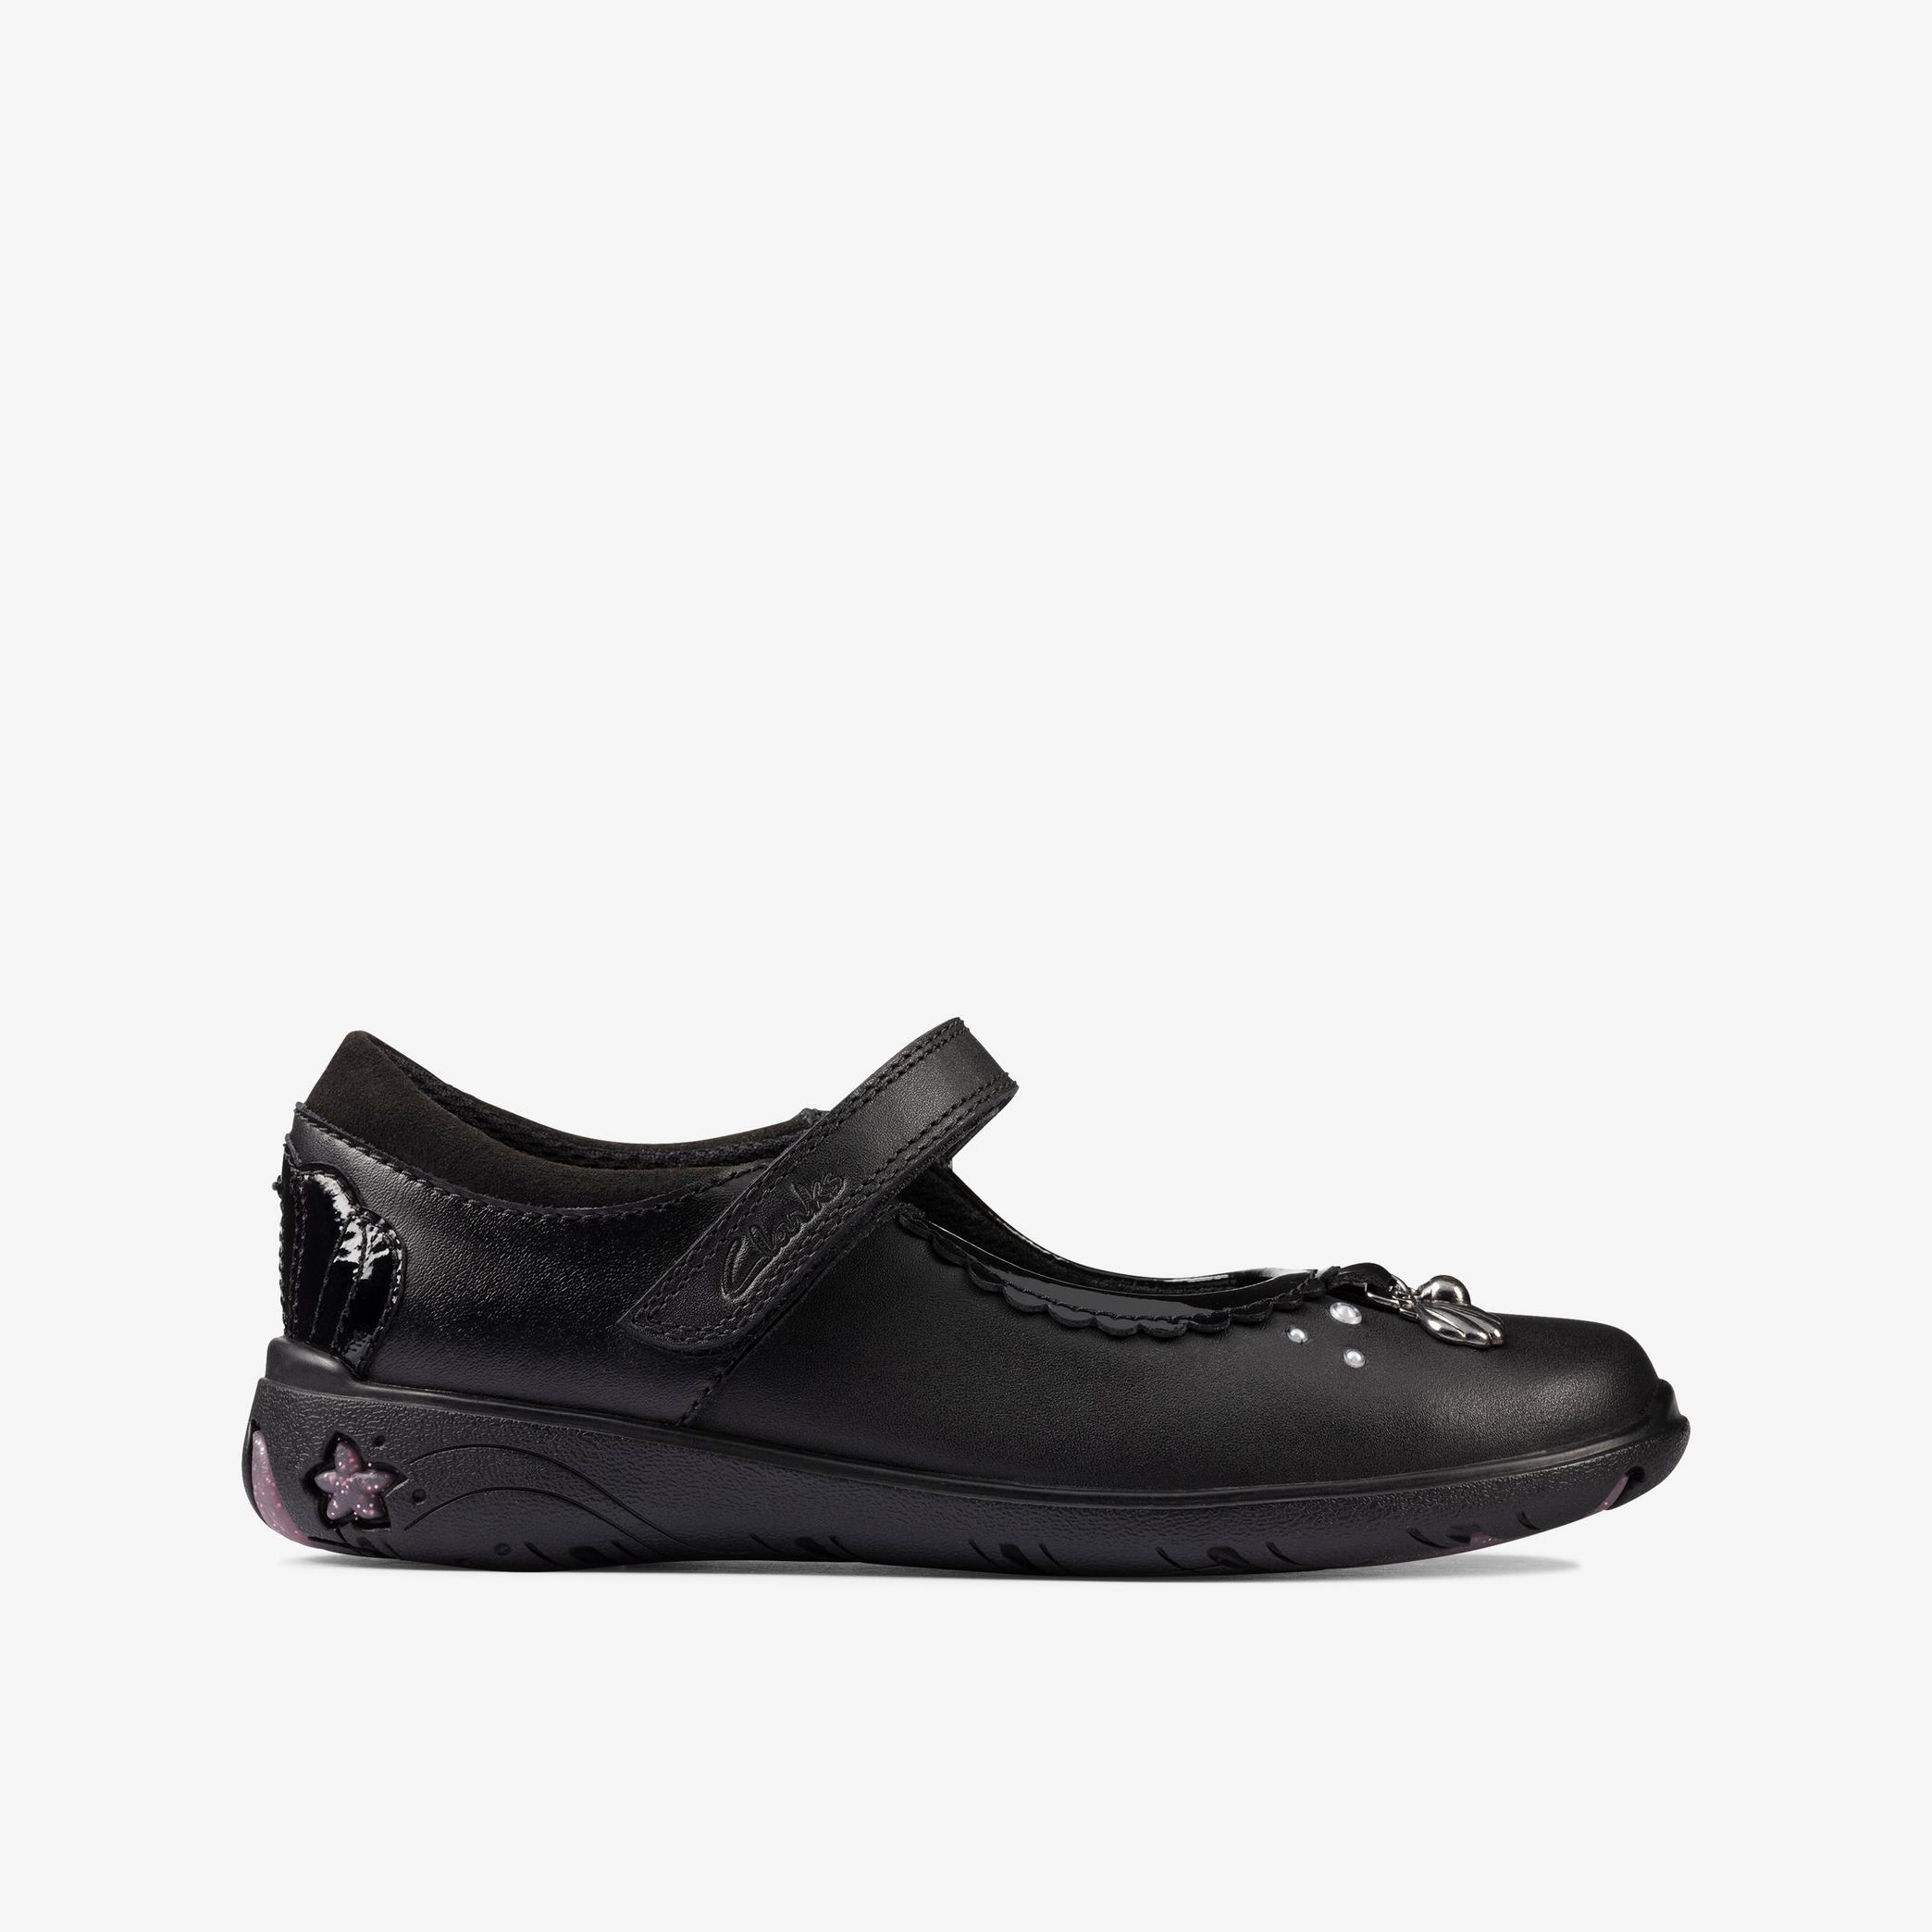 Sea Shimmer Kid Black Leather Bar Shoes, view 1 of 6